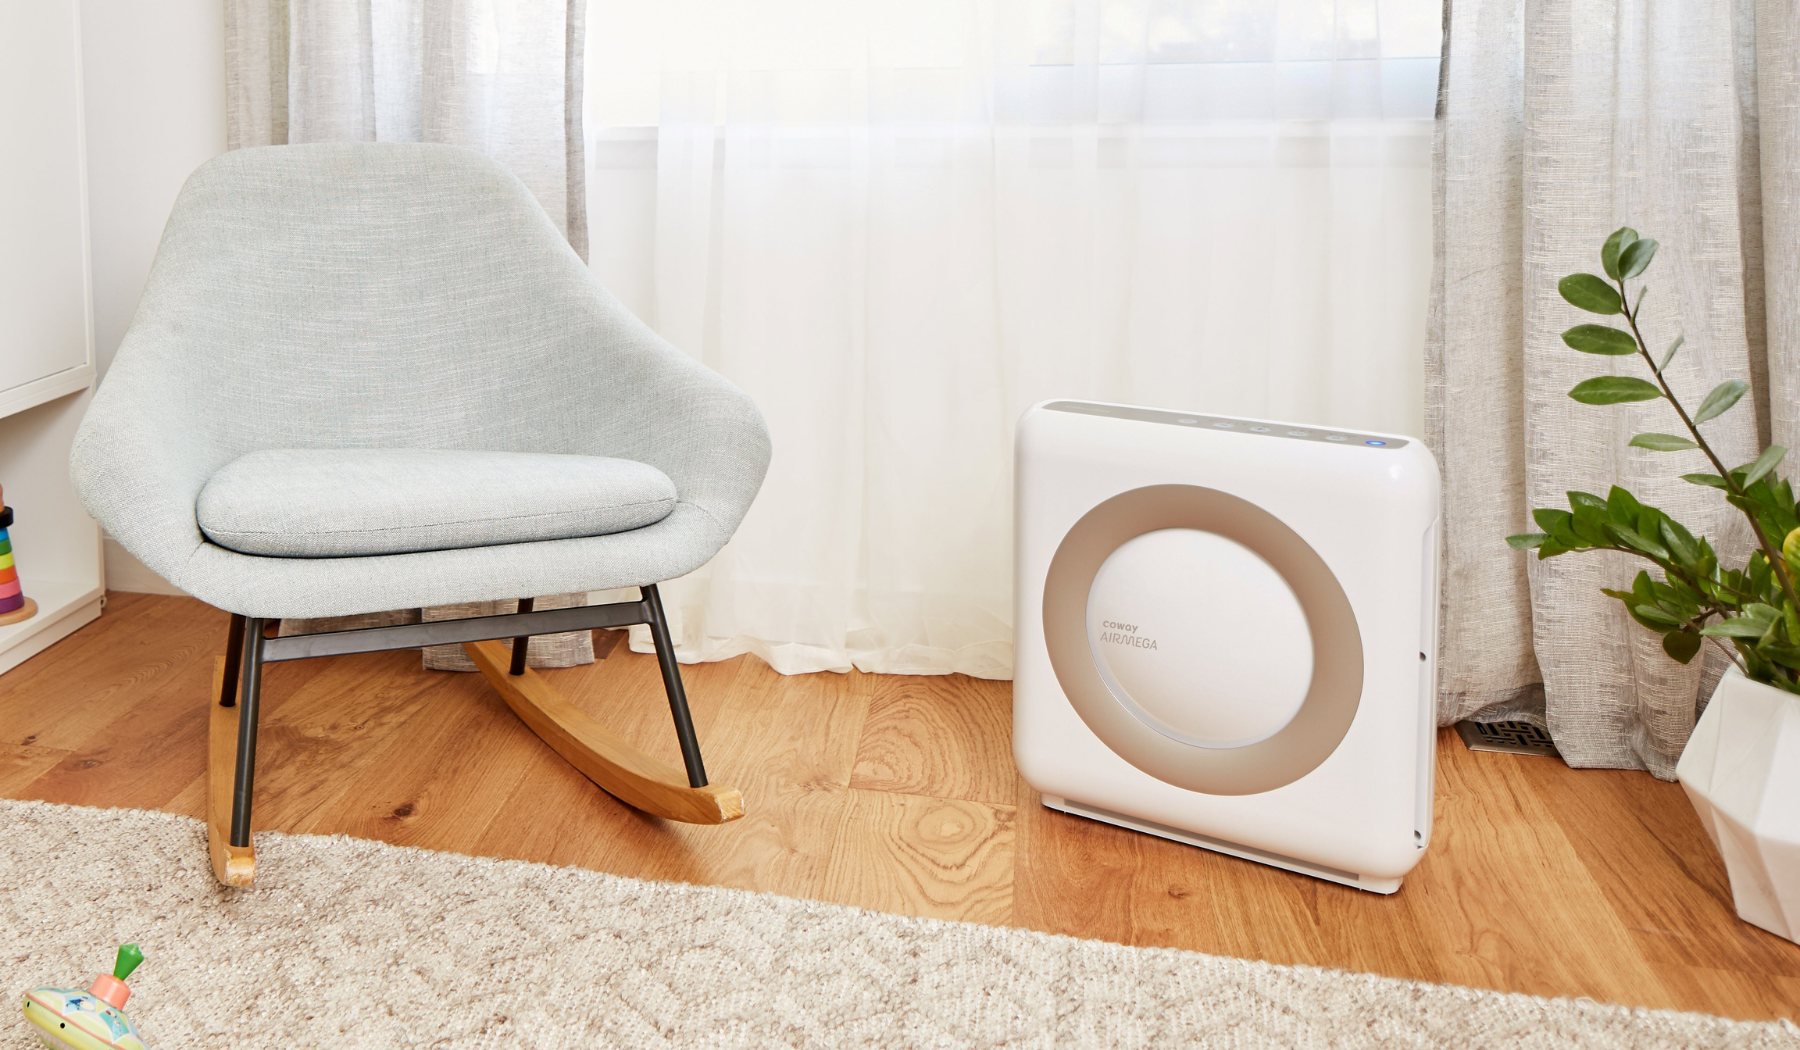 Coway Airmega air purifier in bedroom beside plant and chair